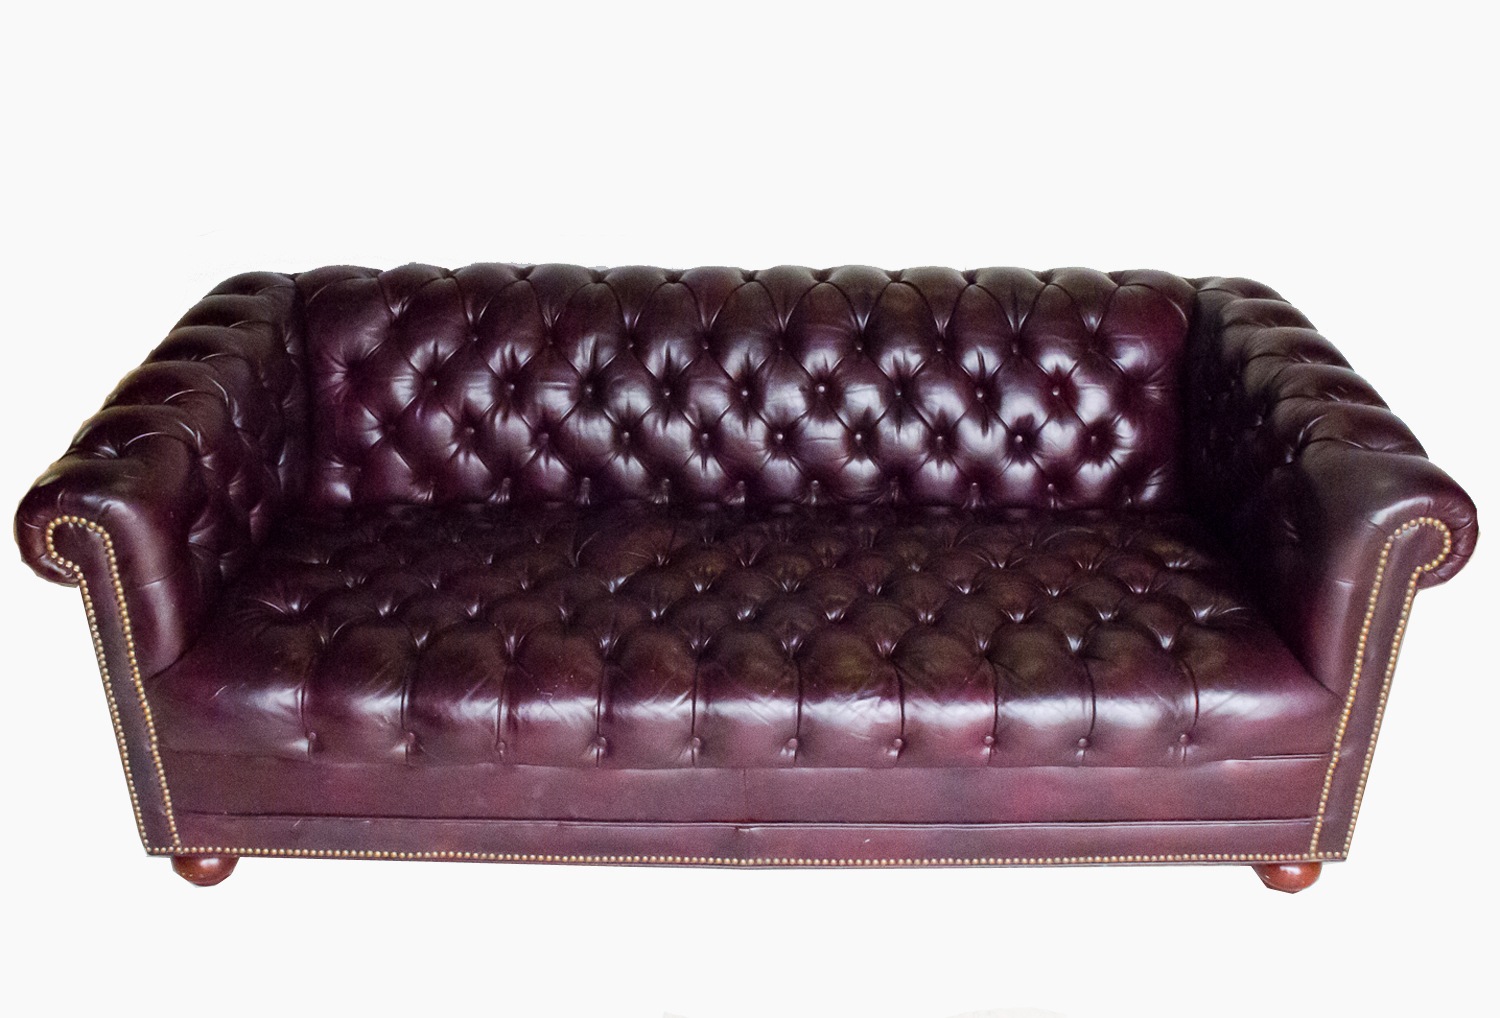 21 Living Room Tufted Leather Sofa Designs